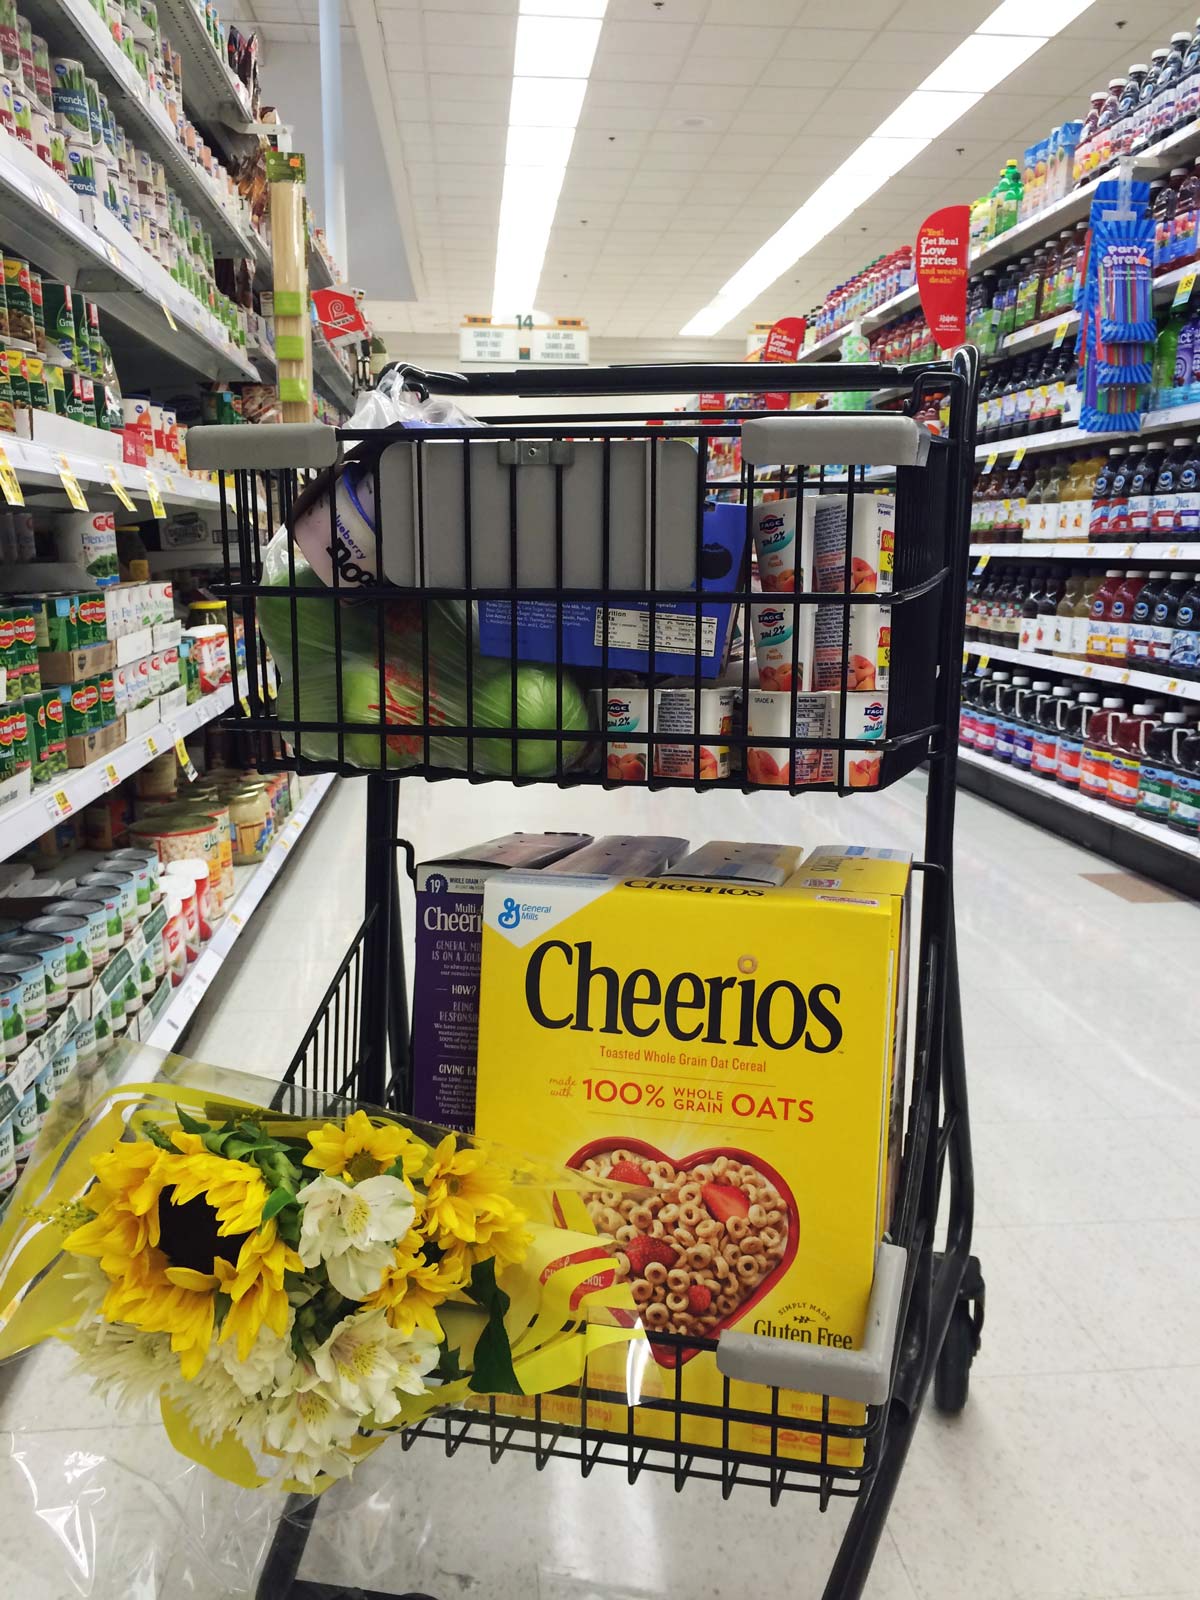 close up of shopping cart with flowers and Cheerios in the bottom basket, in grocery aisle.